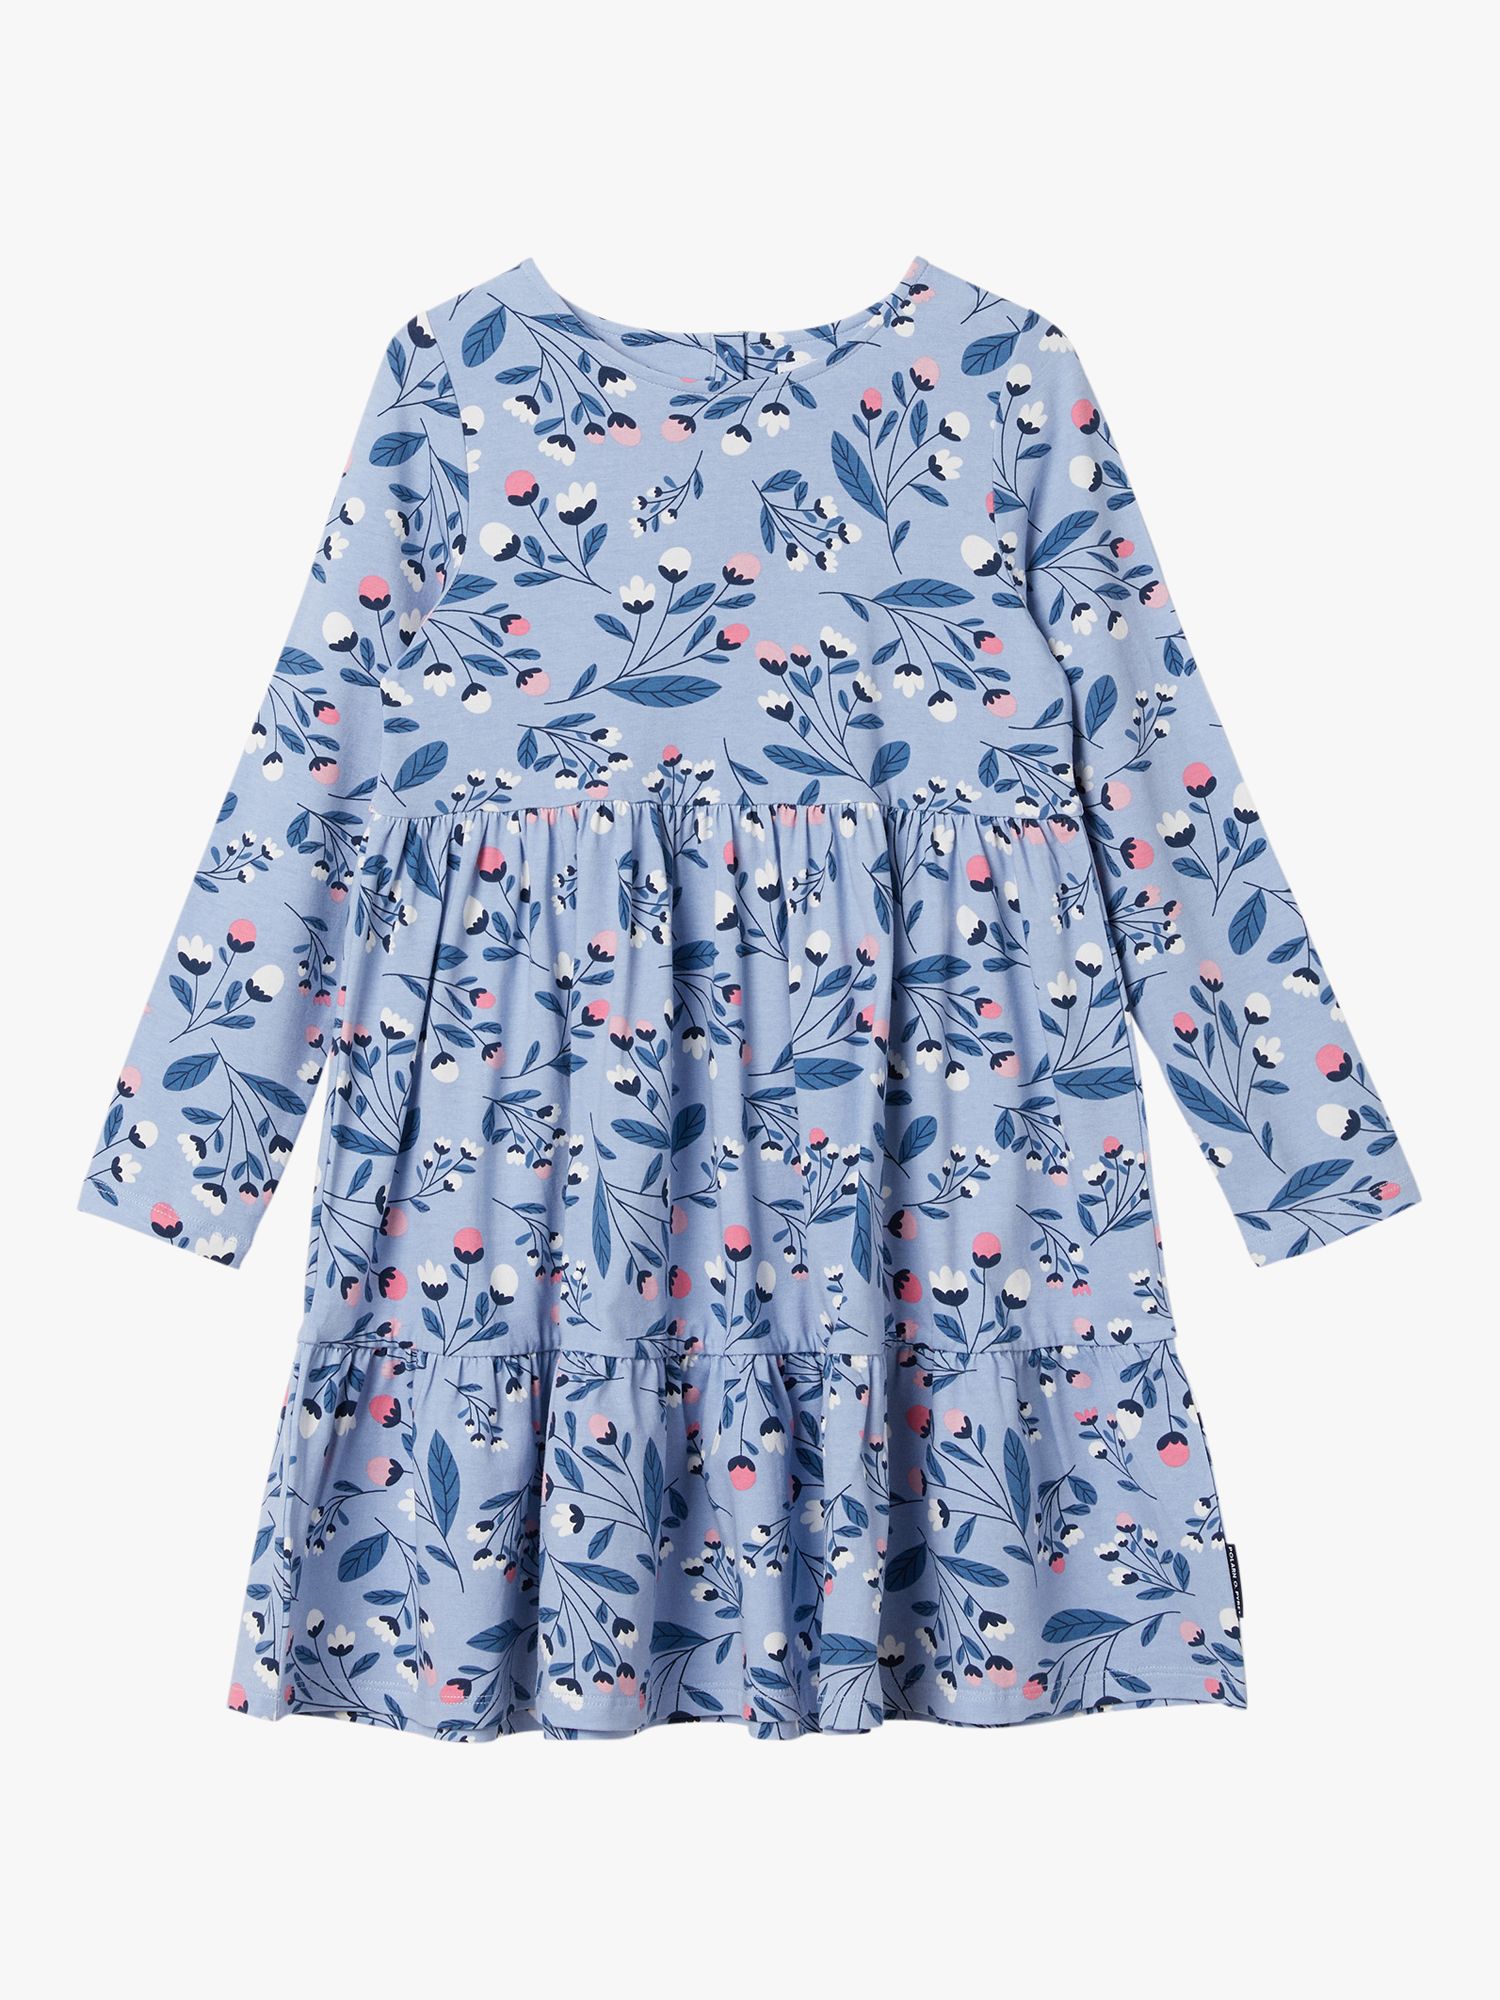 Polarn O. Pyret Kids' Organic Cotton Floral Print Tiered Dress, Blue, 9-10 years